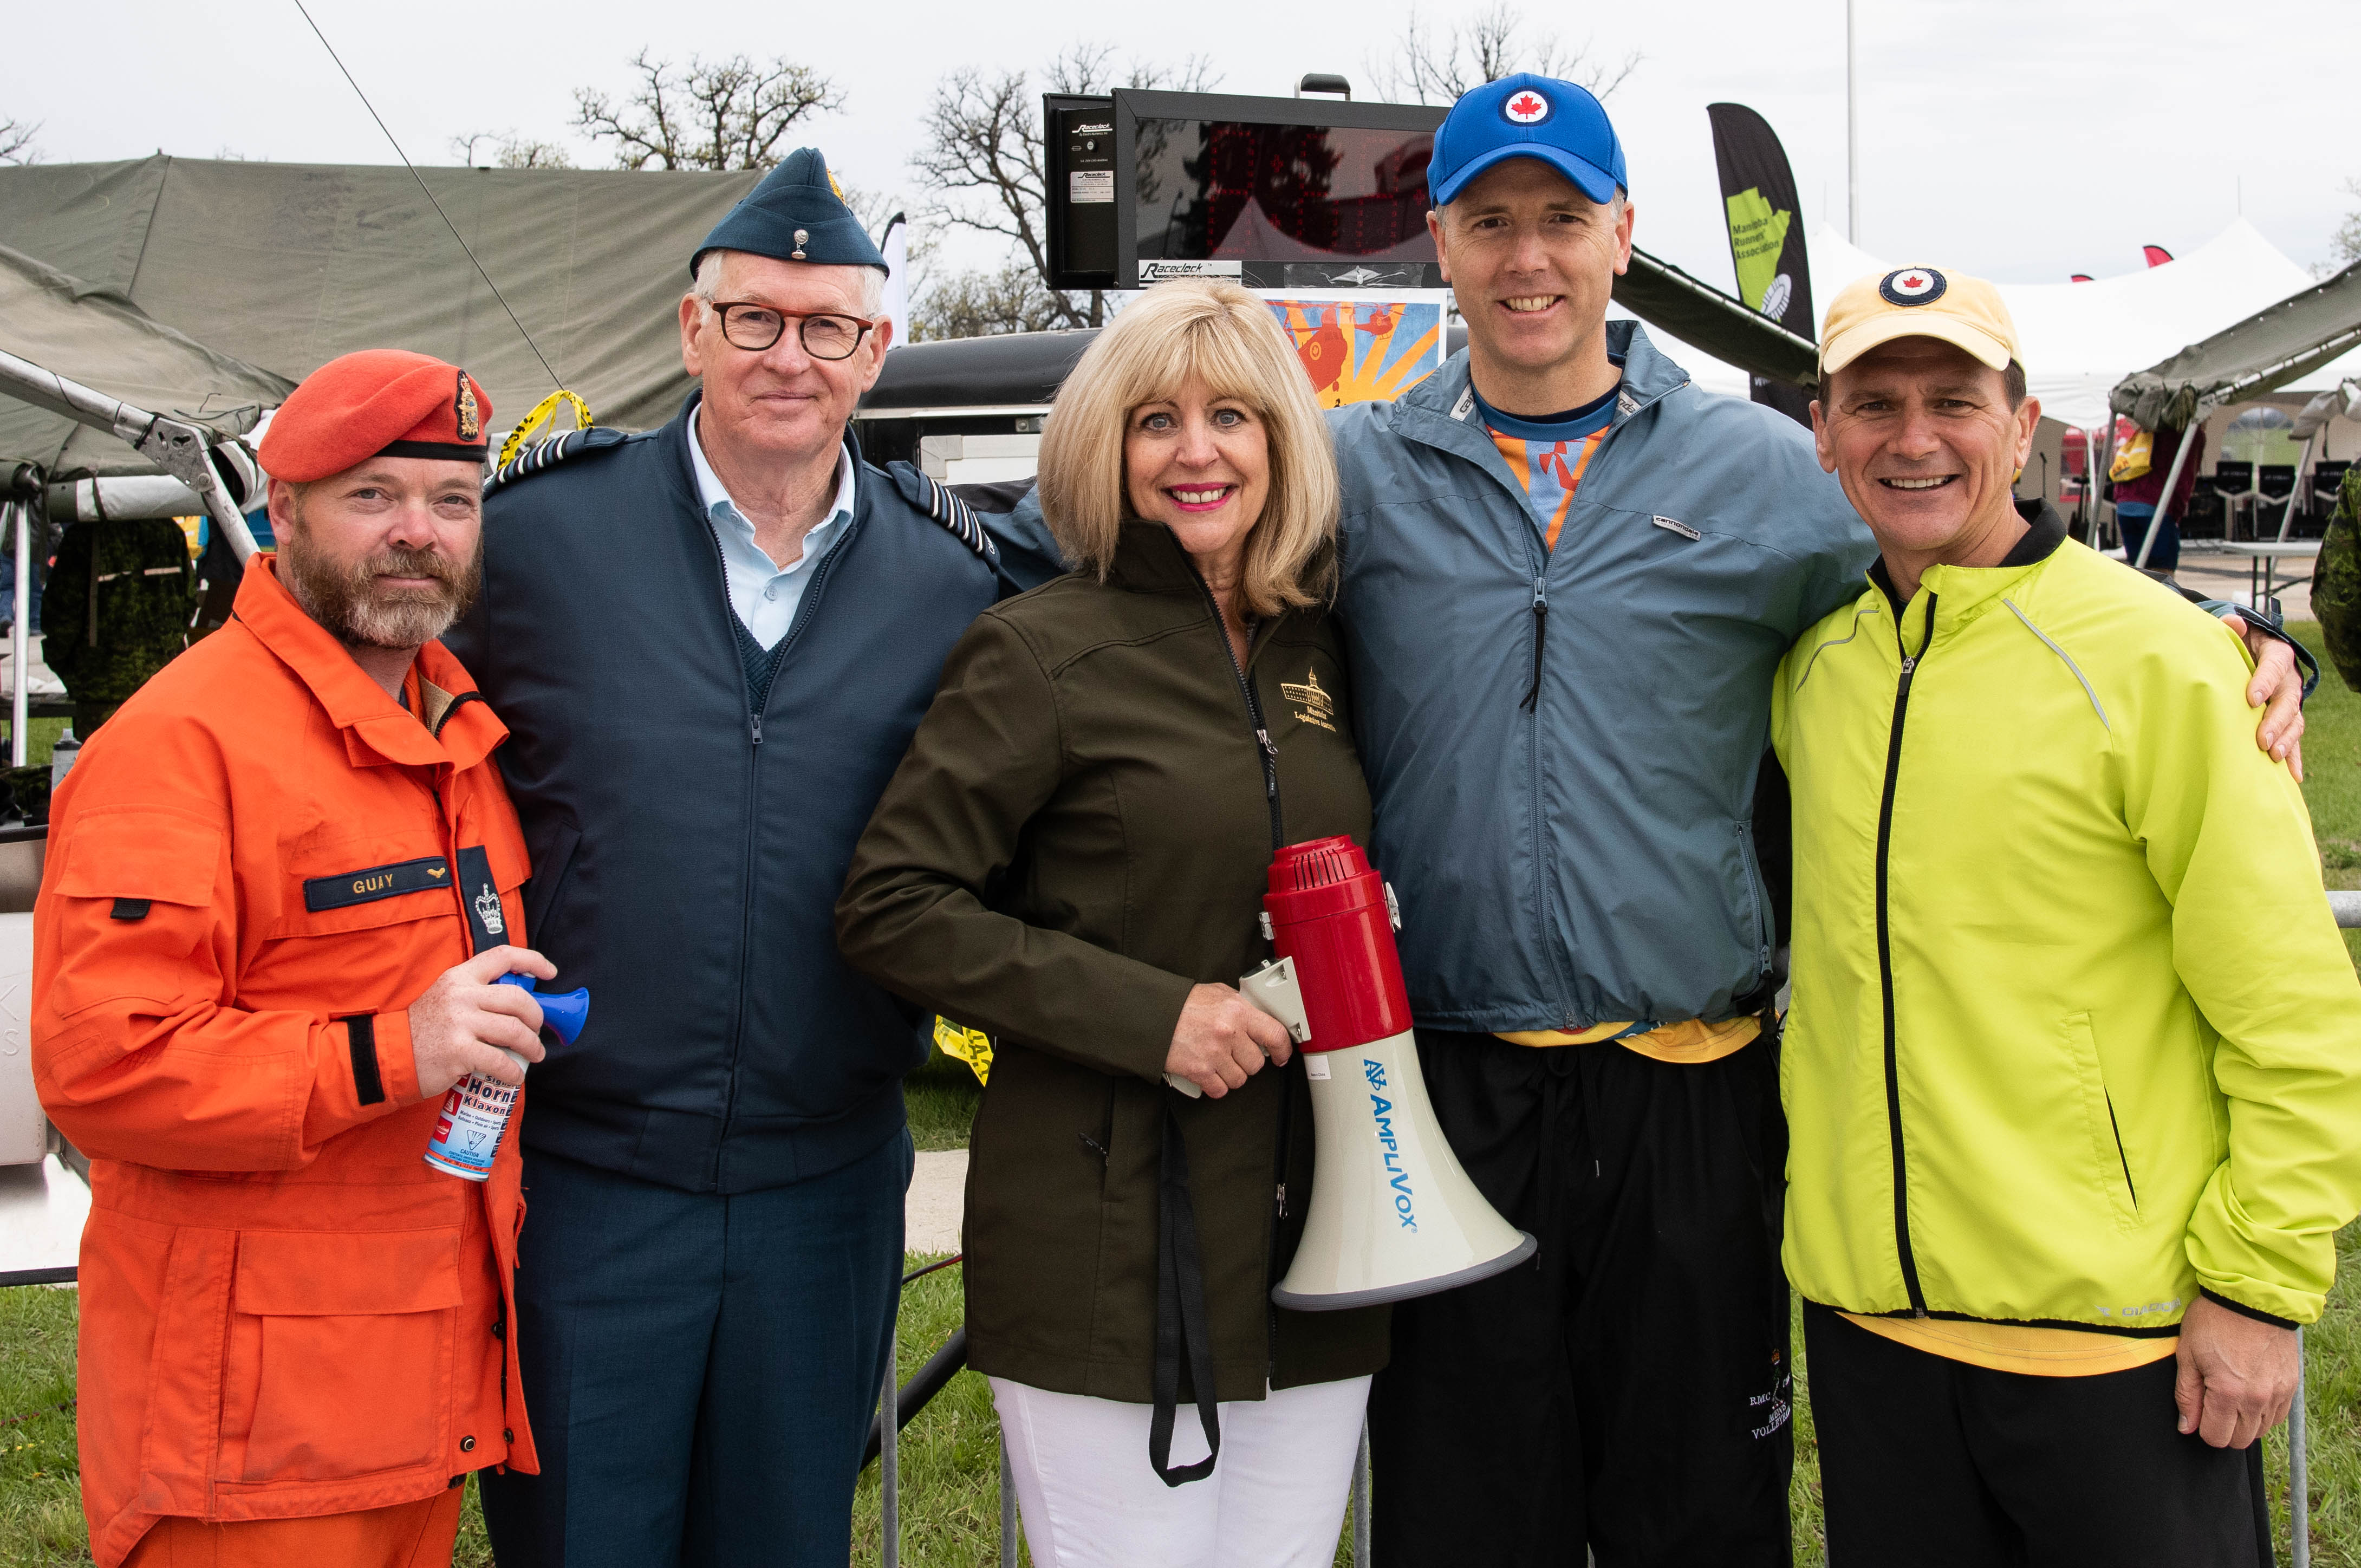 Honorary Colonel Stuart Murray, second from left, with the team starting the RCAF Run in 2019. With him are Warrant Officer Dwayne Guay, Cathy Cox, Manitoba Minister of Sport Culture and Heritage, Lieutenant General Al Meinzinger, Commander of the RCAF, and Chief Warrant Officer Denis Gaudreault, RCAF Chief Warrant Officer. PHOTO: Master Corporal Justin Ancelin